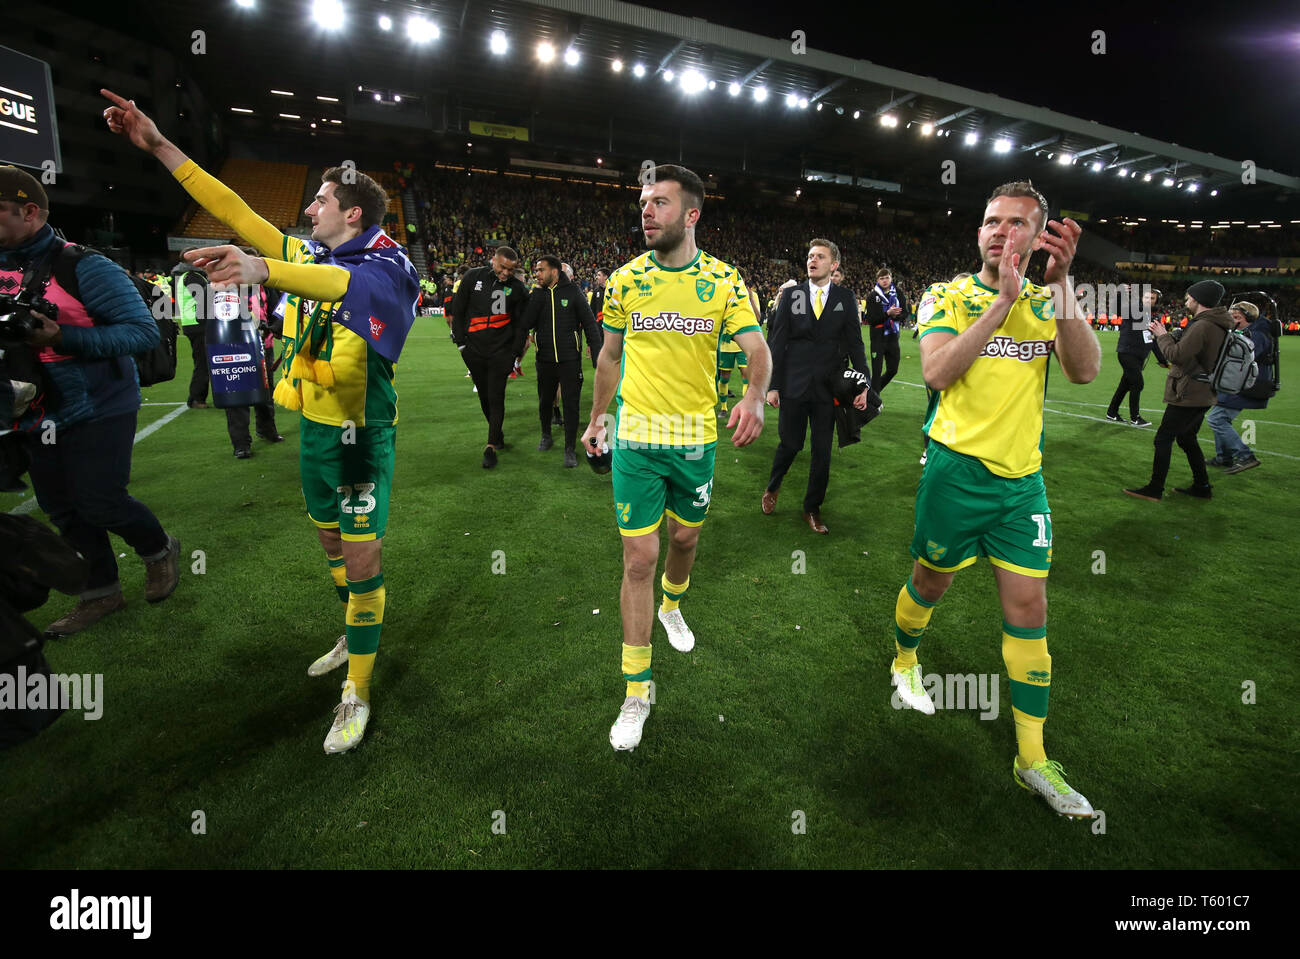 Norwich City's Kenny McLean, Norwich City's Grant Hanley and Norwich City's Jordan Rhodes celebrate promotion to the Premier League after the final whistle of the Sky Bet Championship match at Carrow Road, Norwich. Stock Photo